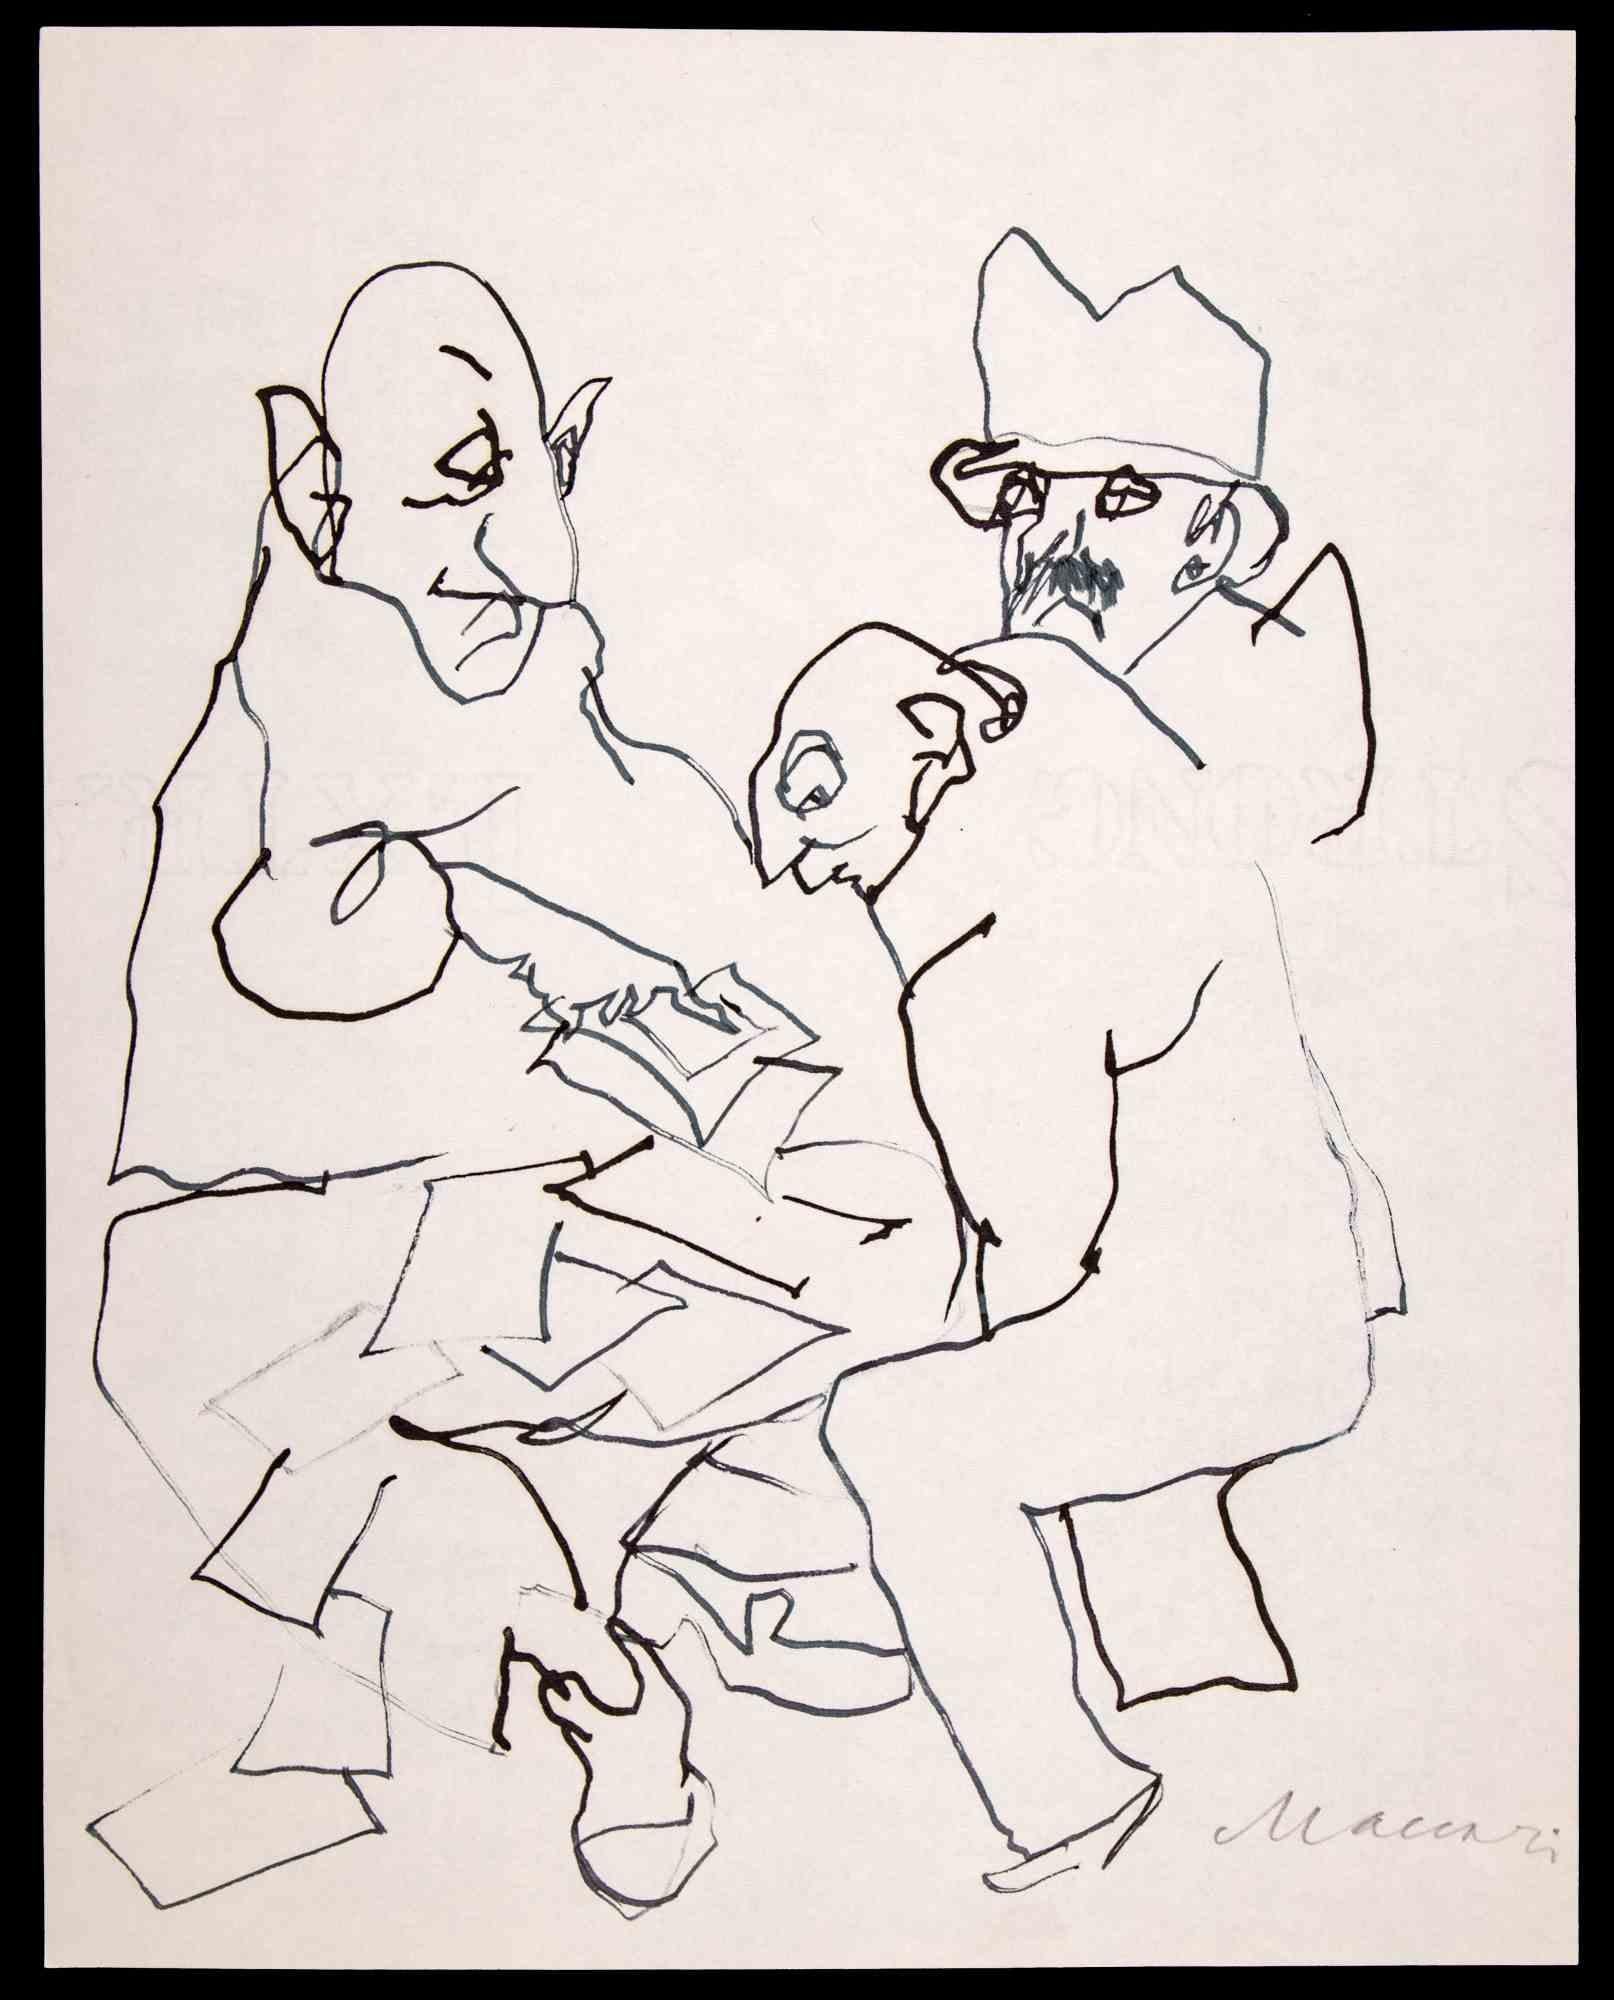 Figures is a china ink Drawing realized by Mino Maccari (1924-1989) in 1970s.

Hand-signed on the lower margin.

Good condition on a white paper.

Mino Maccari (Siena, 1924-Rome, June 16, 1989) was an Italian writer, painter, engraver and